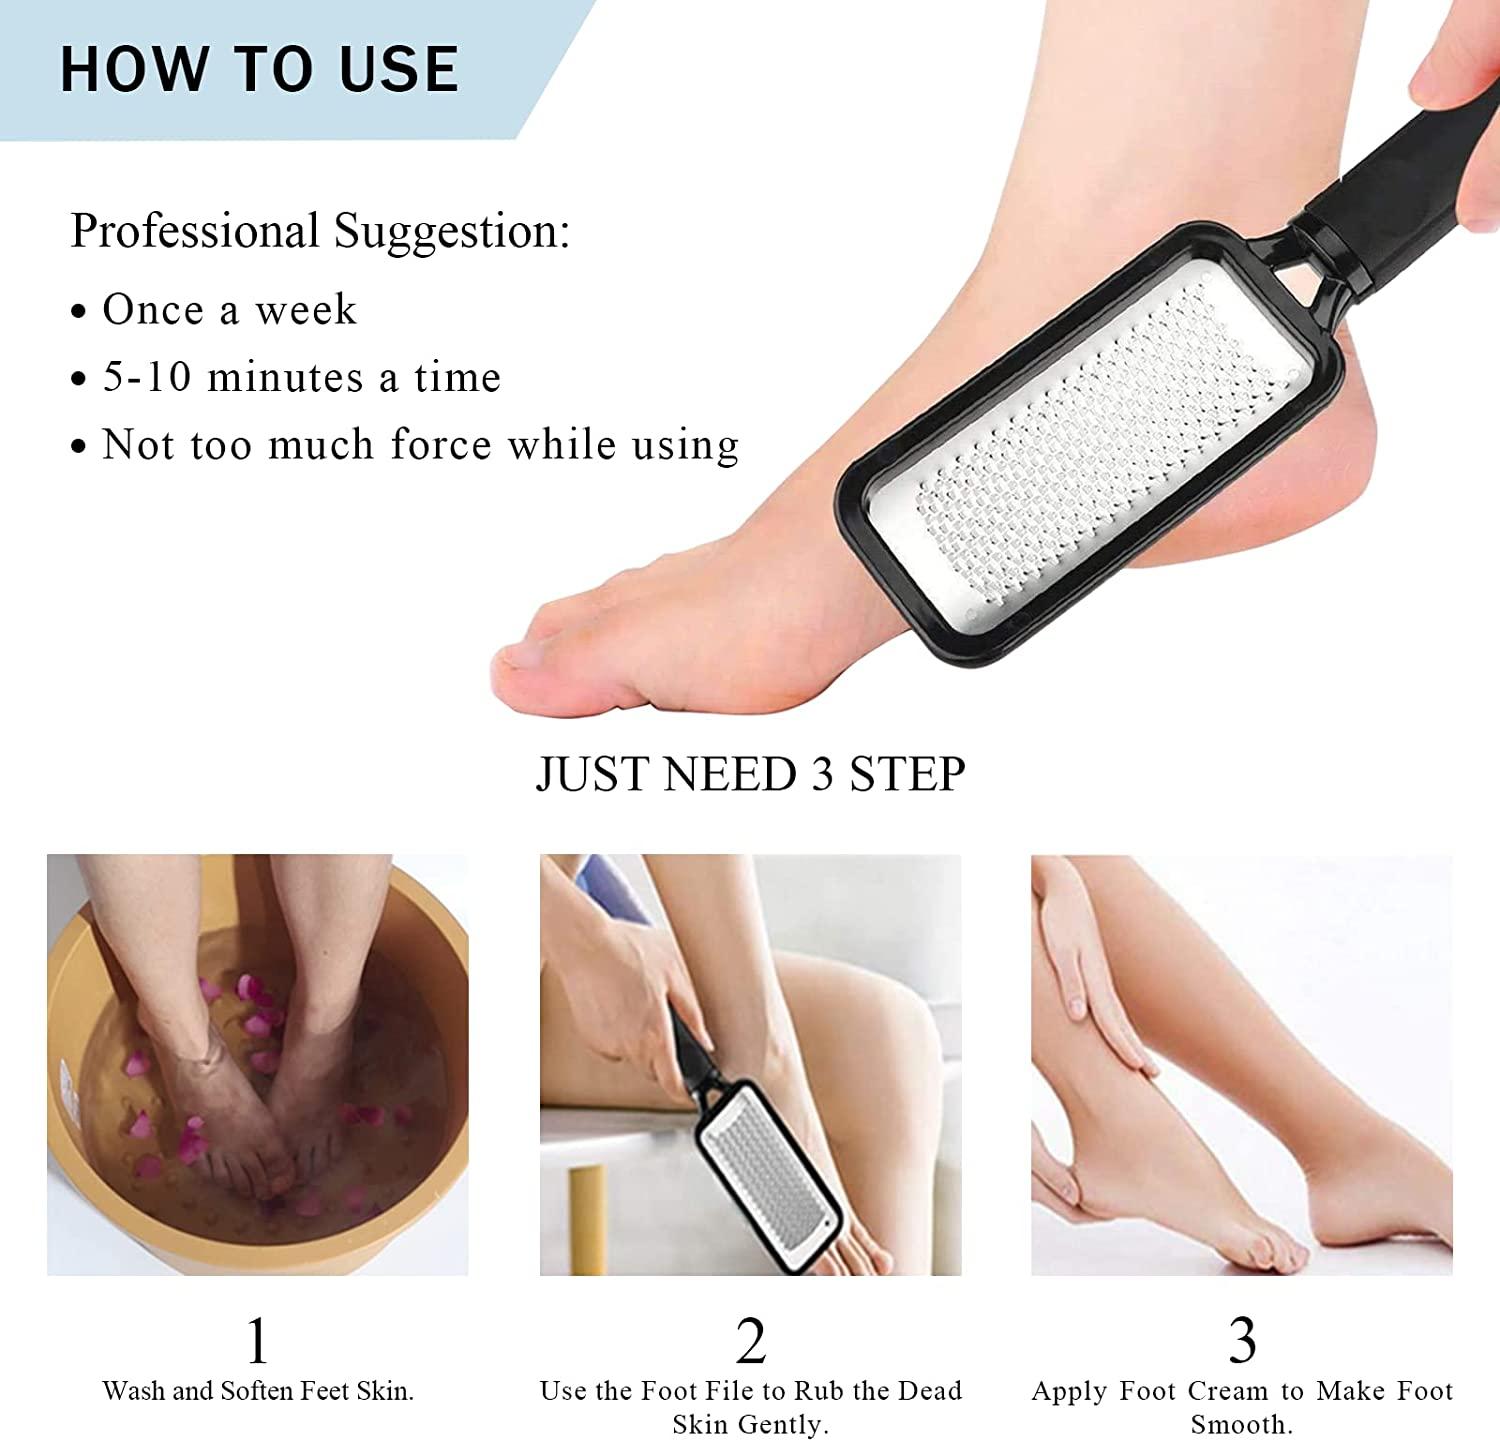 Rikans Colossal Foot File, Professional Foot Rasp Callus Remover, Foot Care  Pedicure Tool to Remove Hard Skin,Can Be Used on Wet or Dry Skin, Surgical